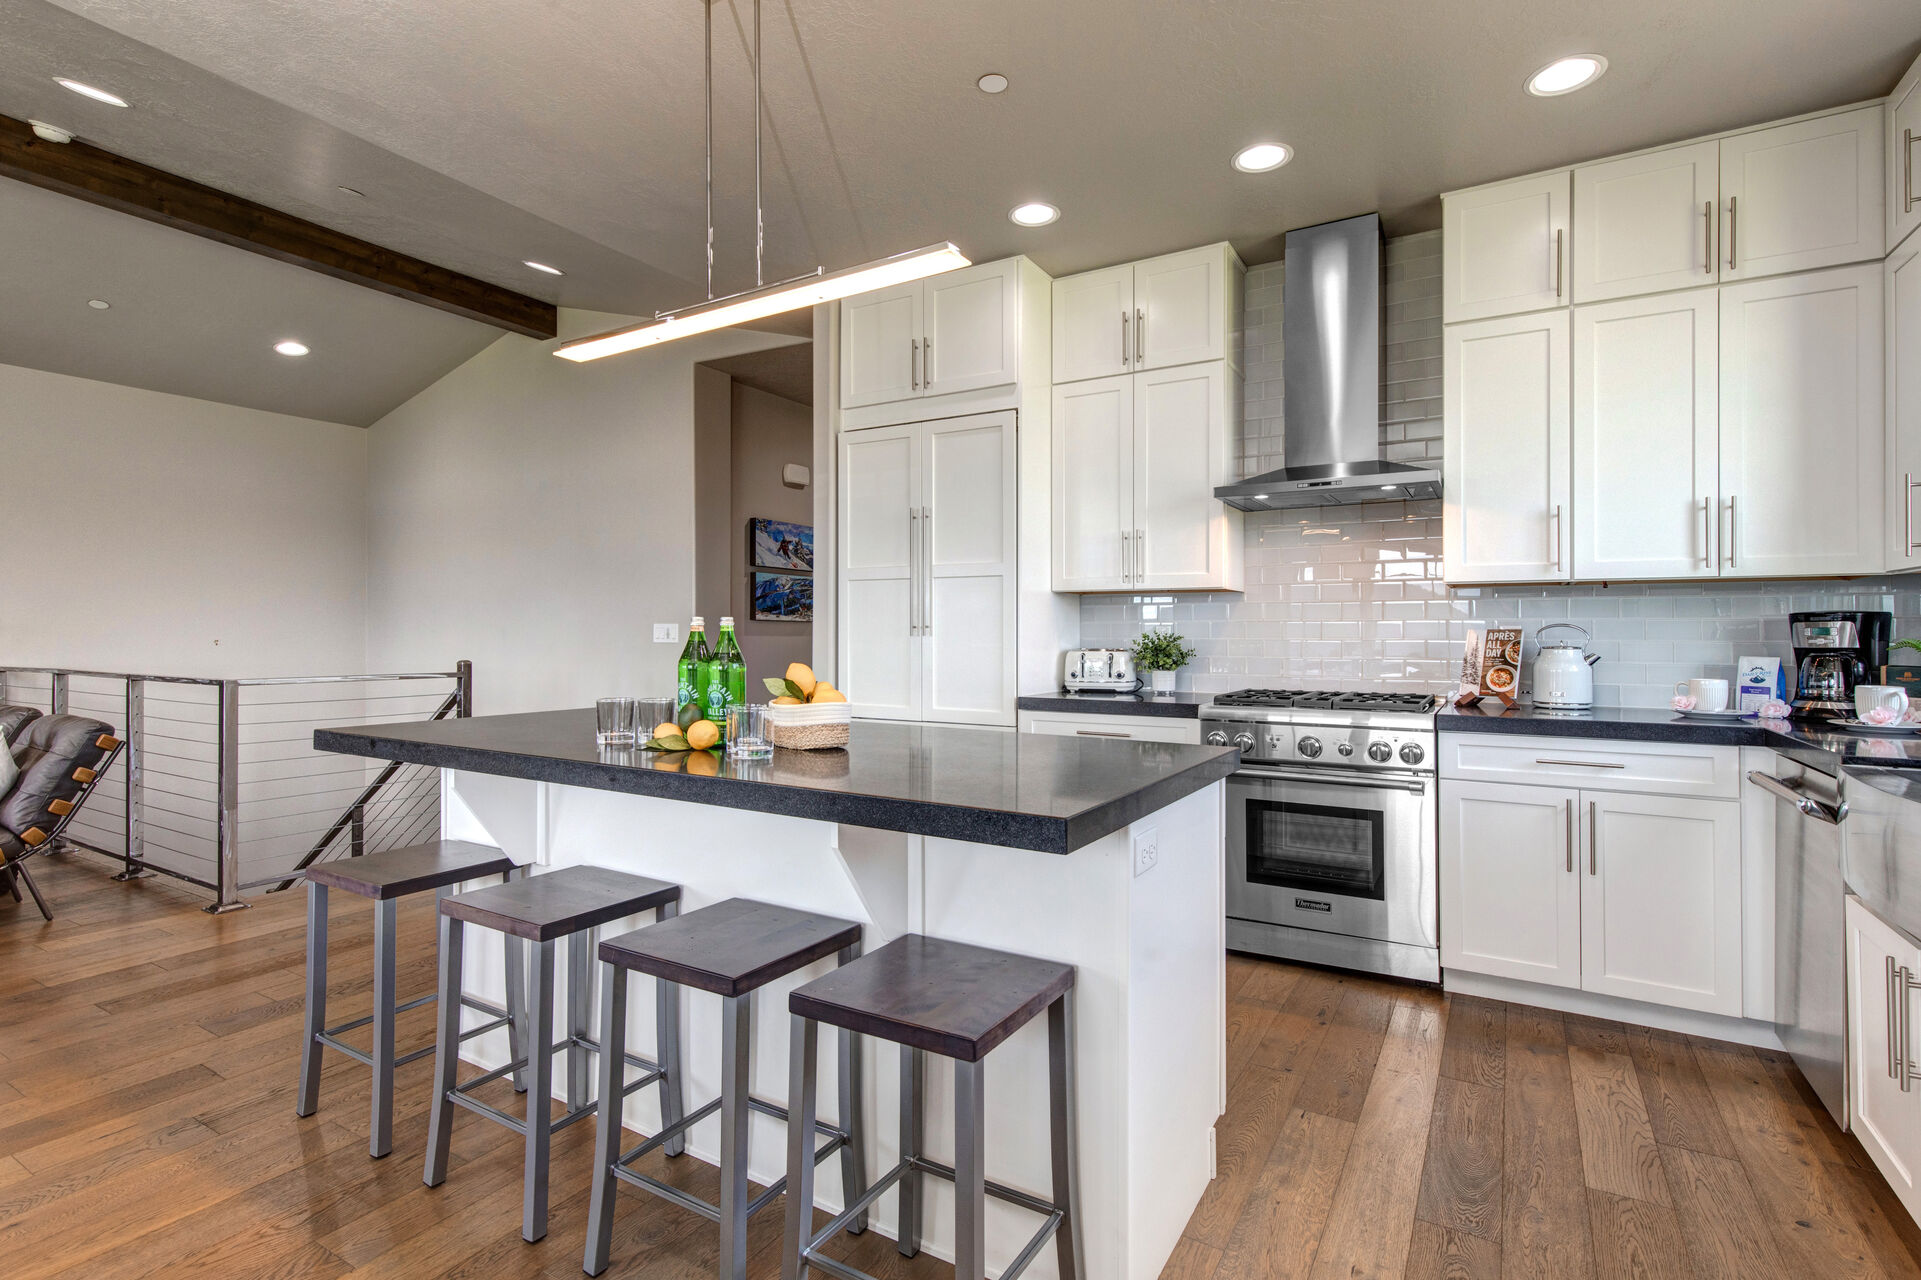 Fully Equipped Kitchen with gorgeous quartz countertops, stainless steel Thermadore appliances, beautiful hardwood floors and bar seating for four